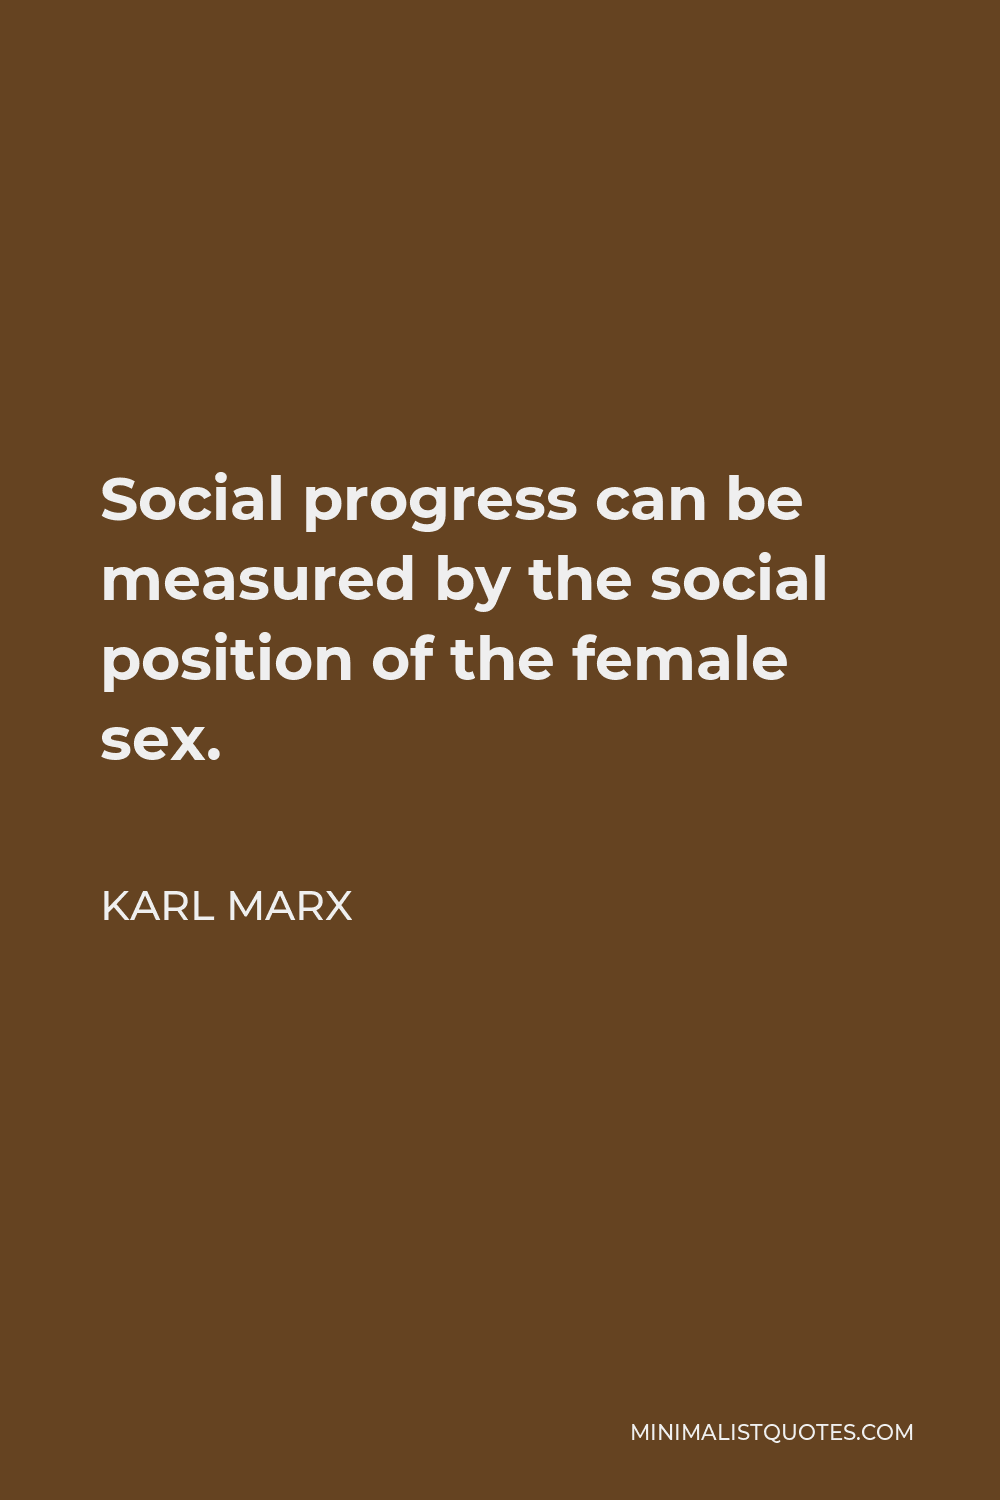 Karl Marx Quote - Social progress can be measured by the social position of the female sex.